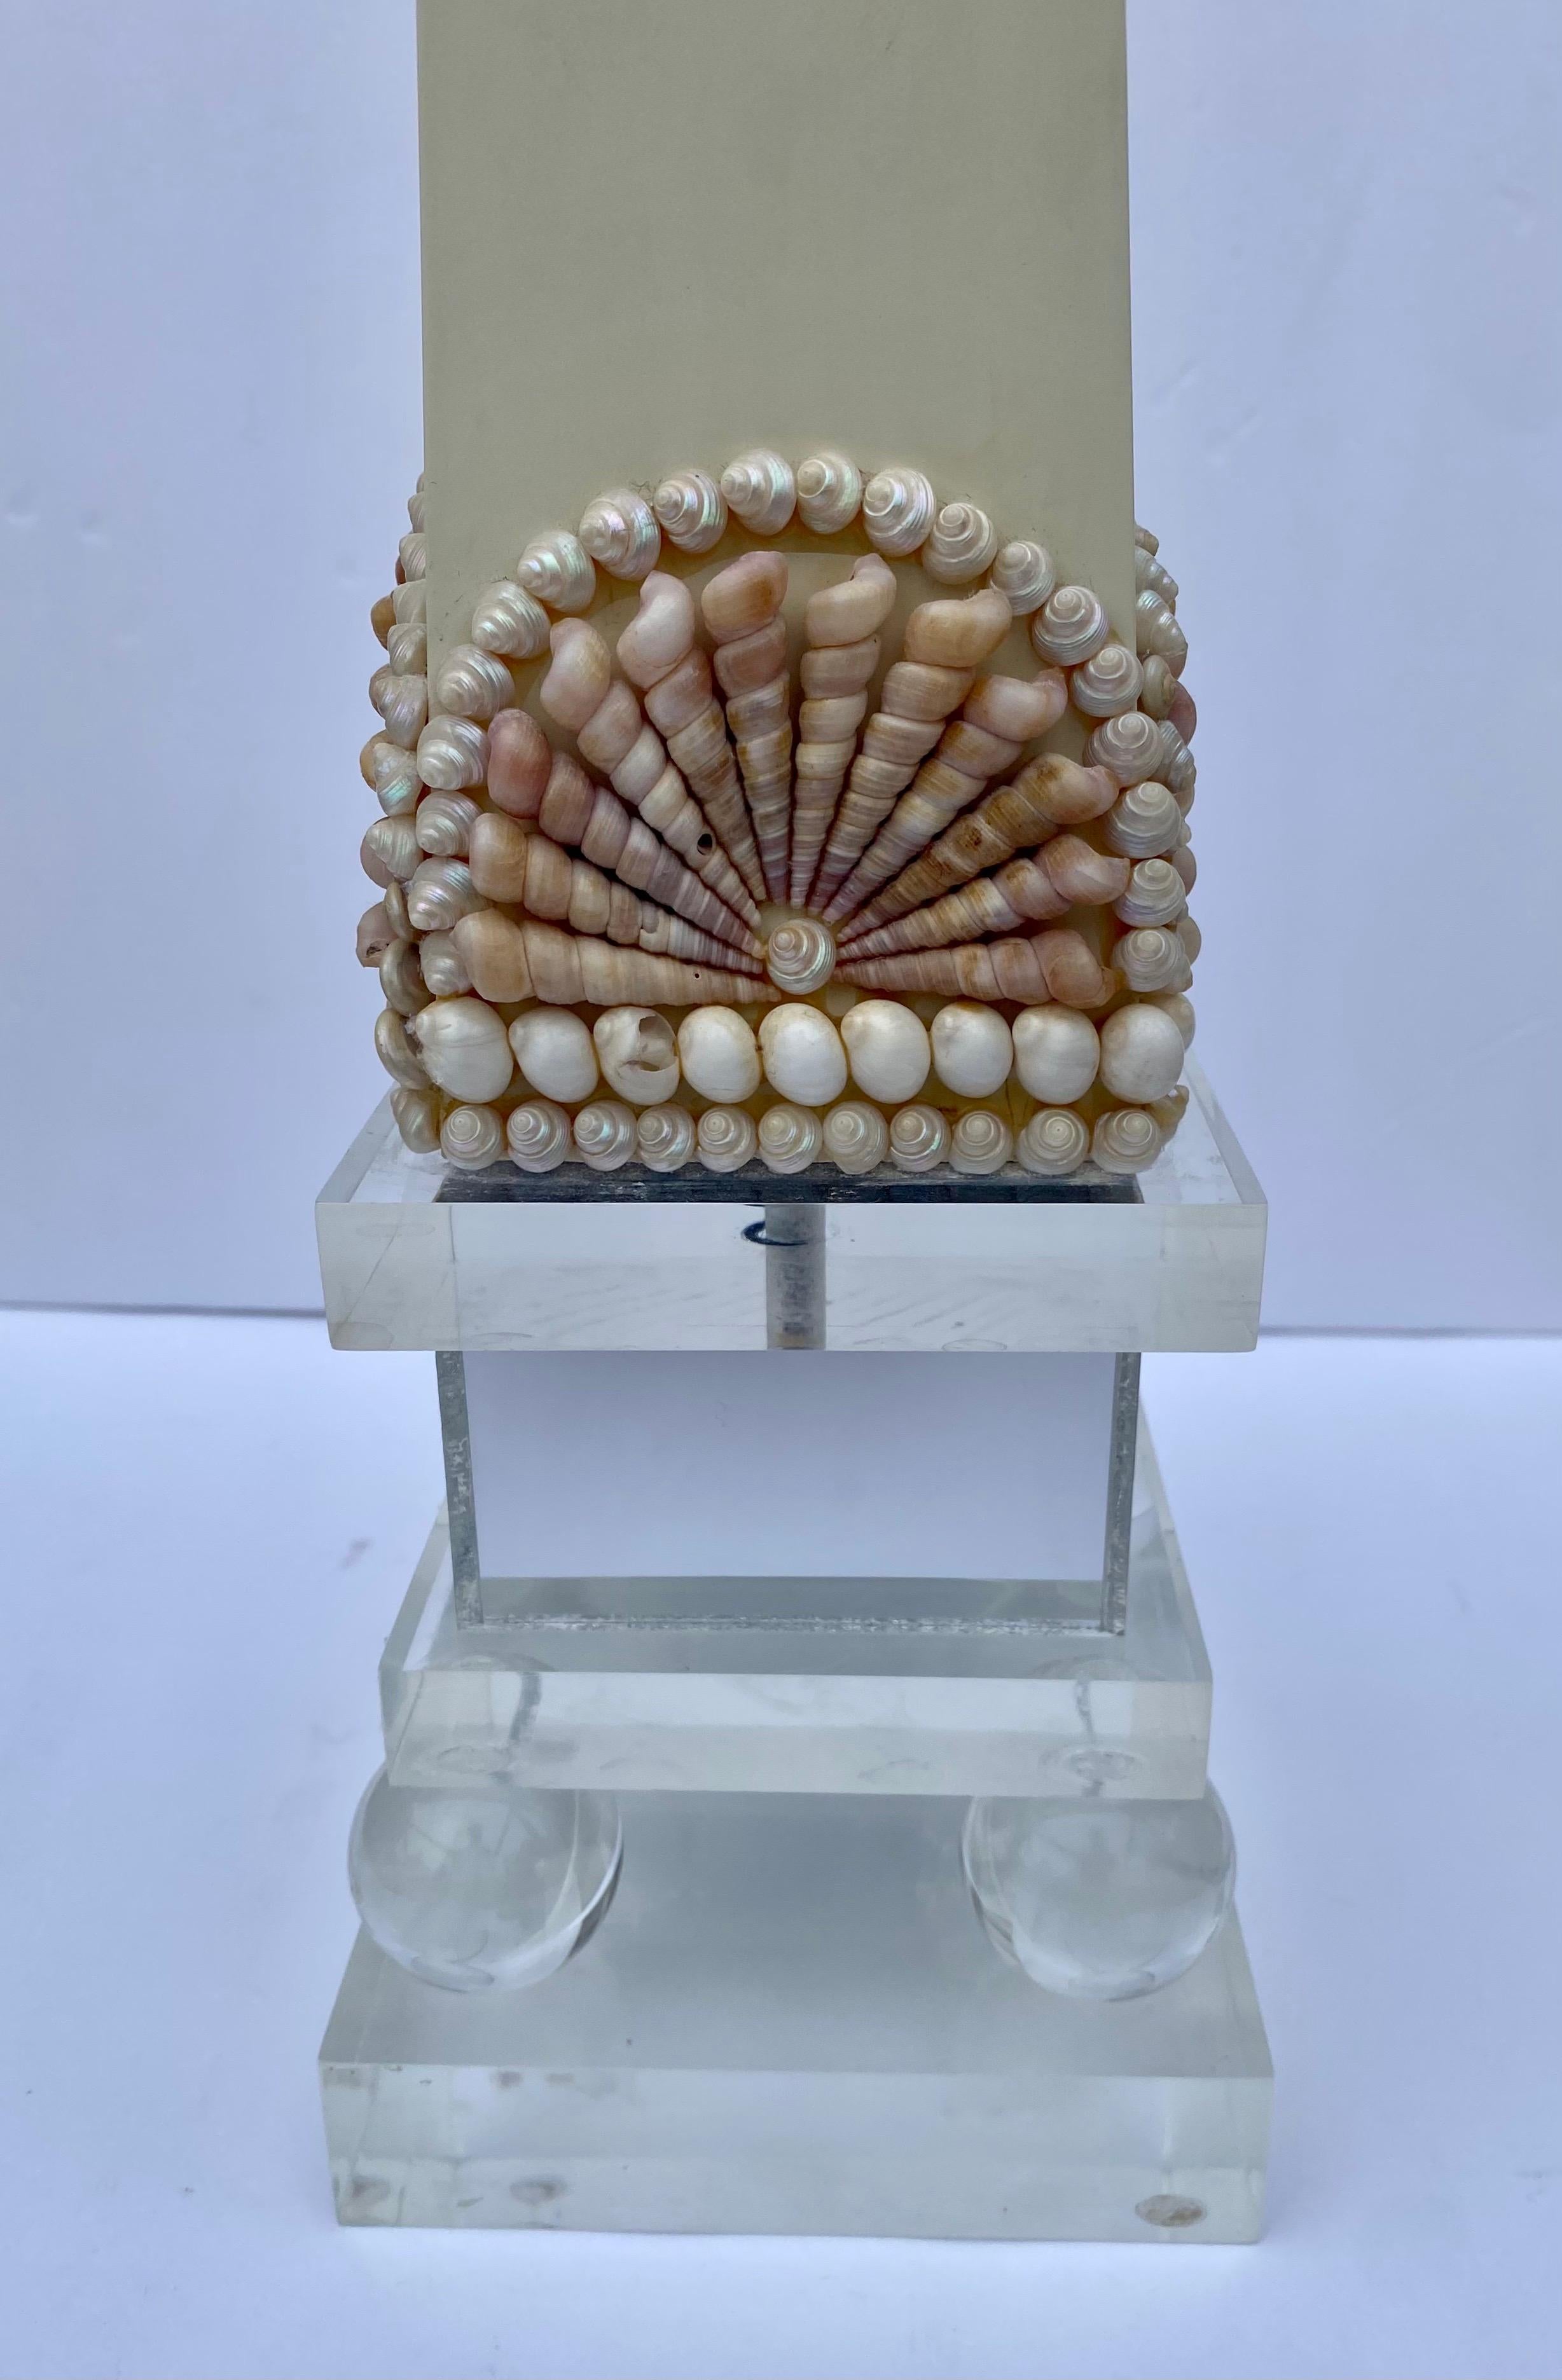 Post Modern 1980s Lucite Shell Seashell Mirror Lacquer Obelisk Table Sculpture For Sale 1